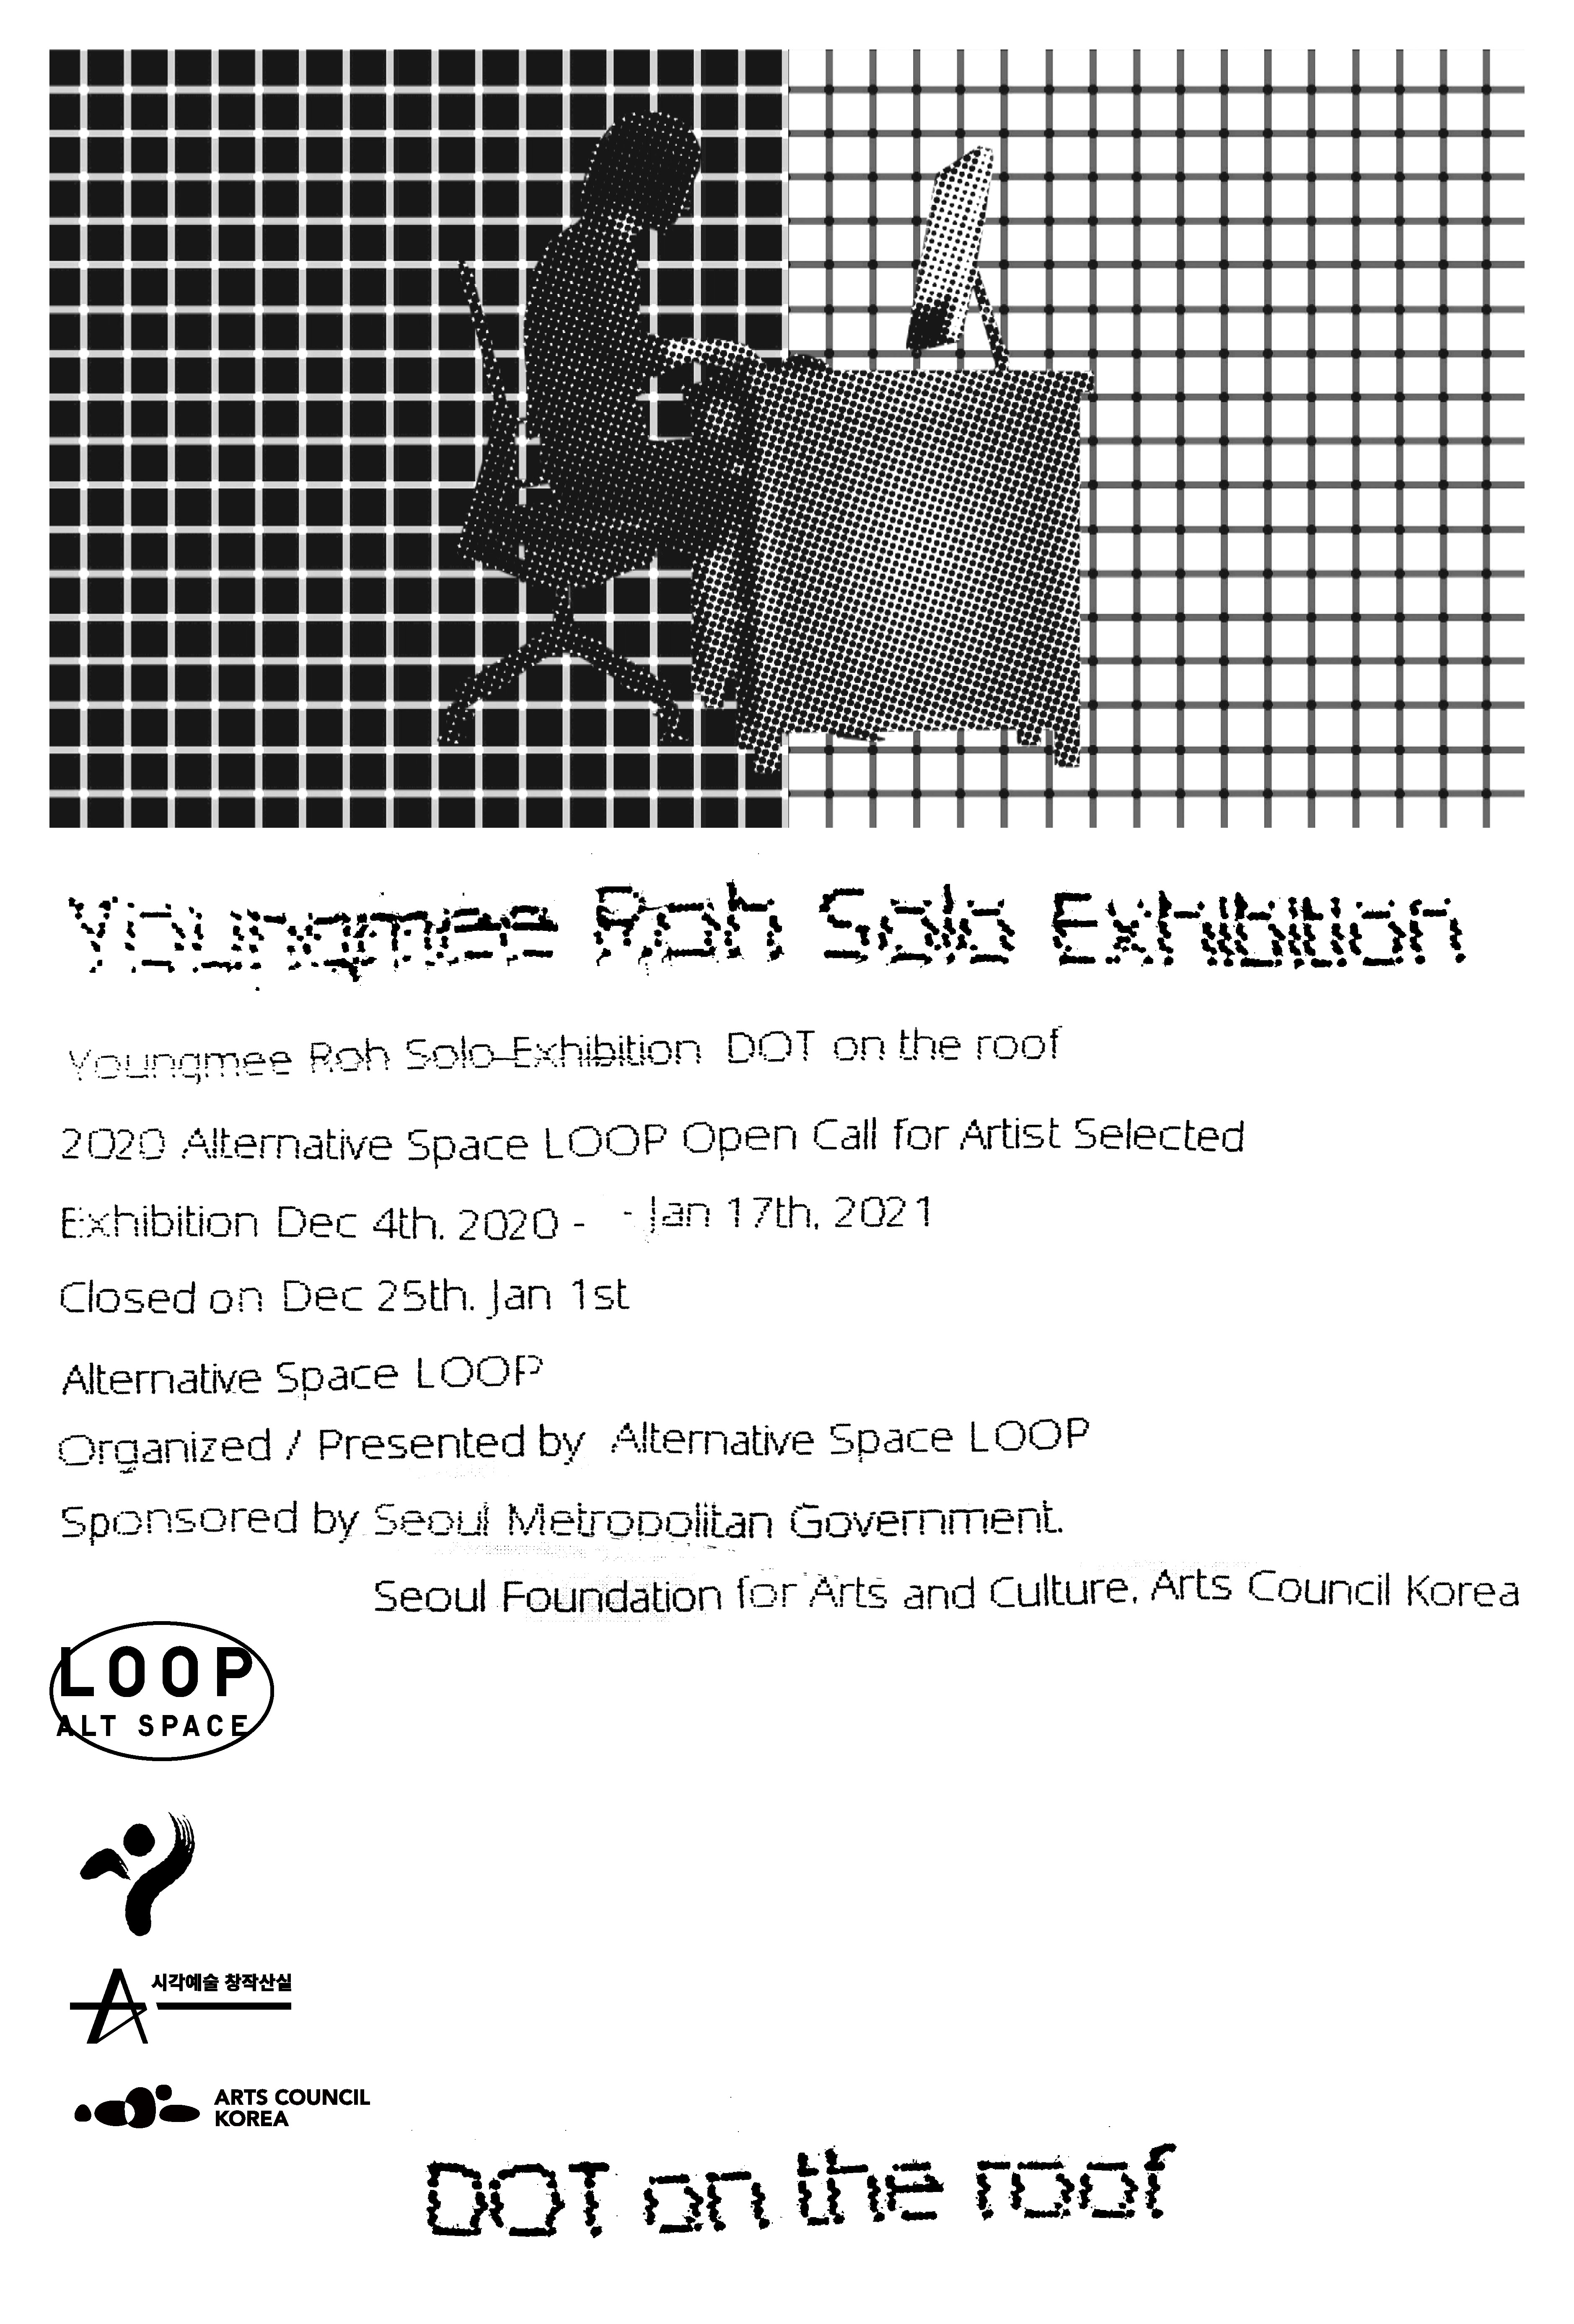 Youngmee Roh Solo Exhibition: DOT on the roof